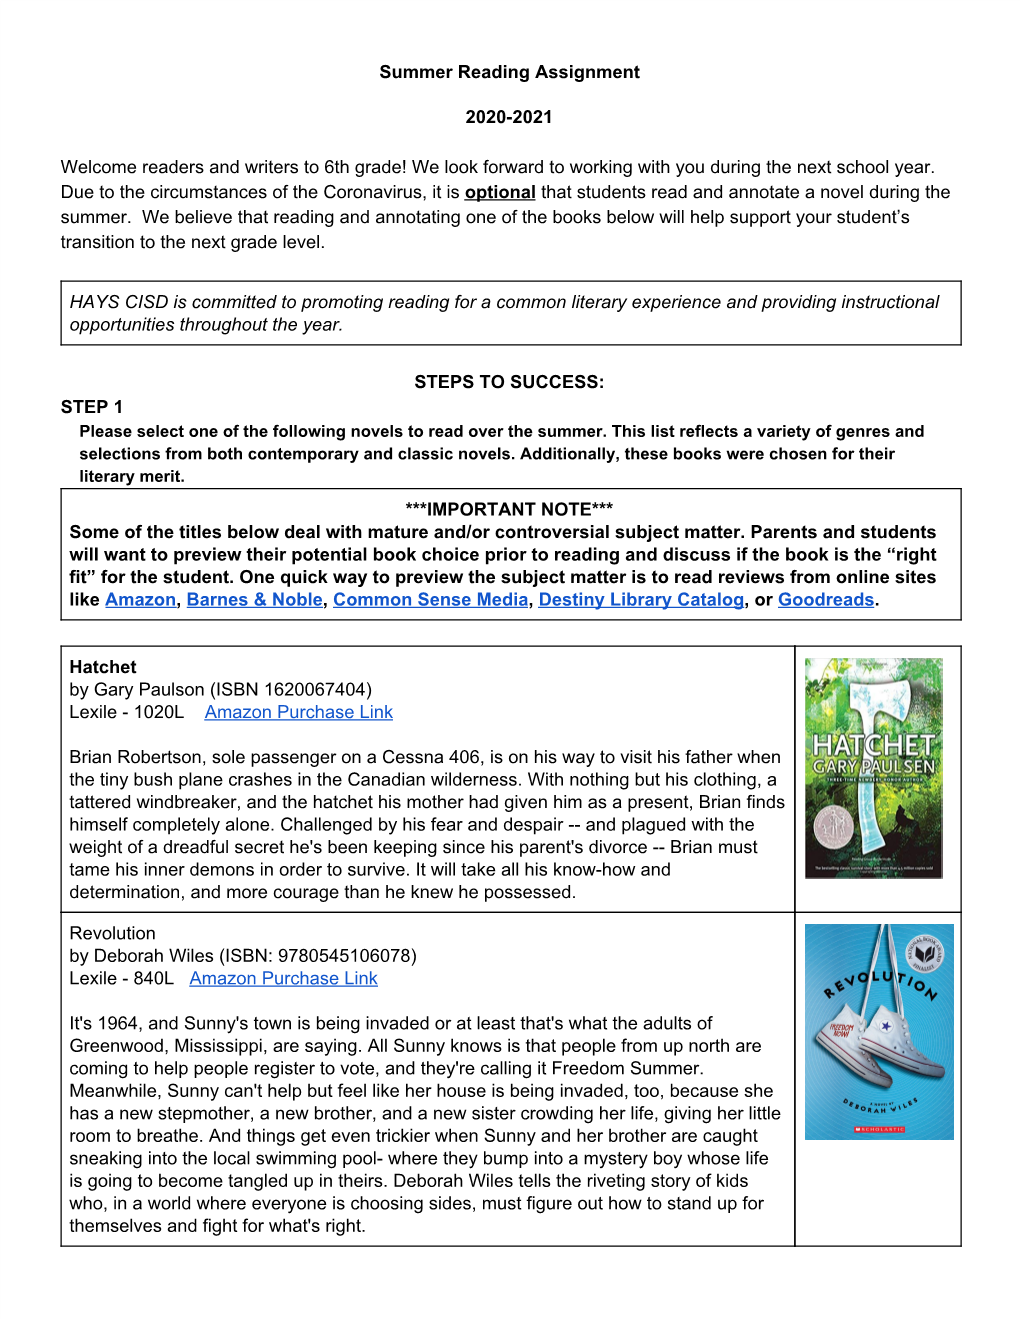 Summer Reading Assignment 2020-2021 Welcome Readers And